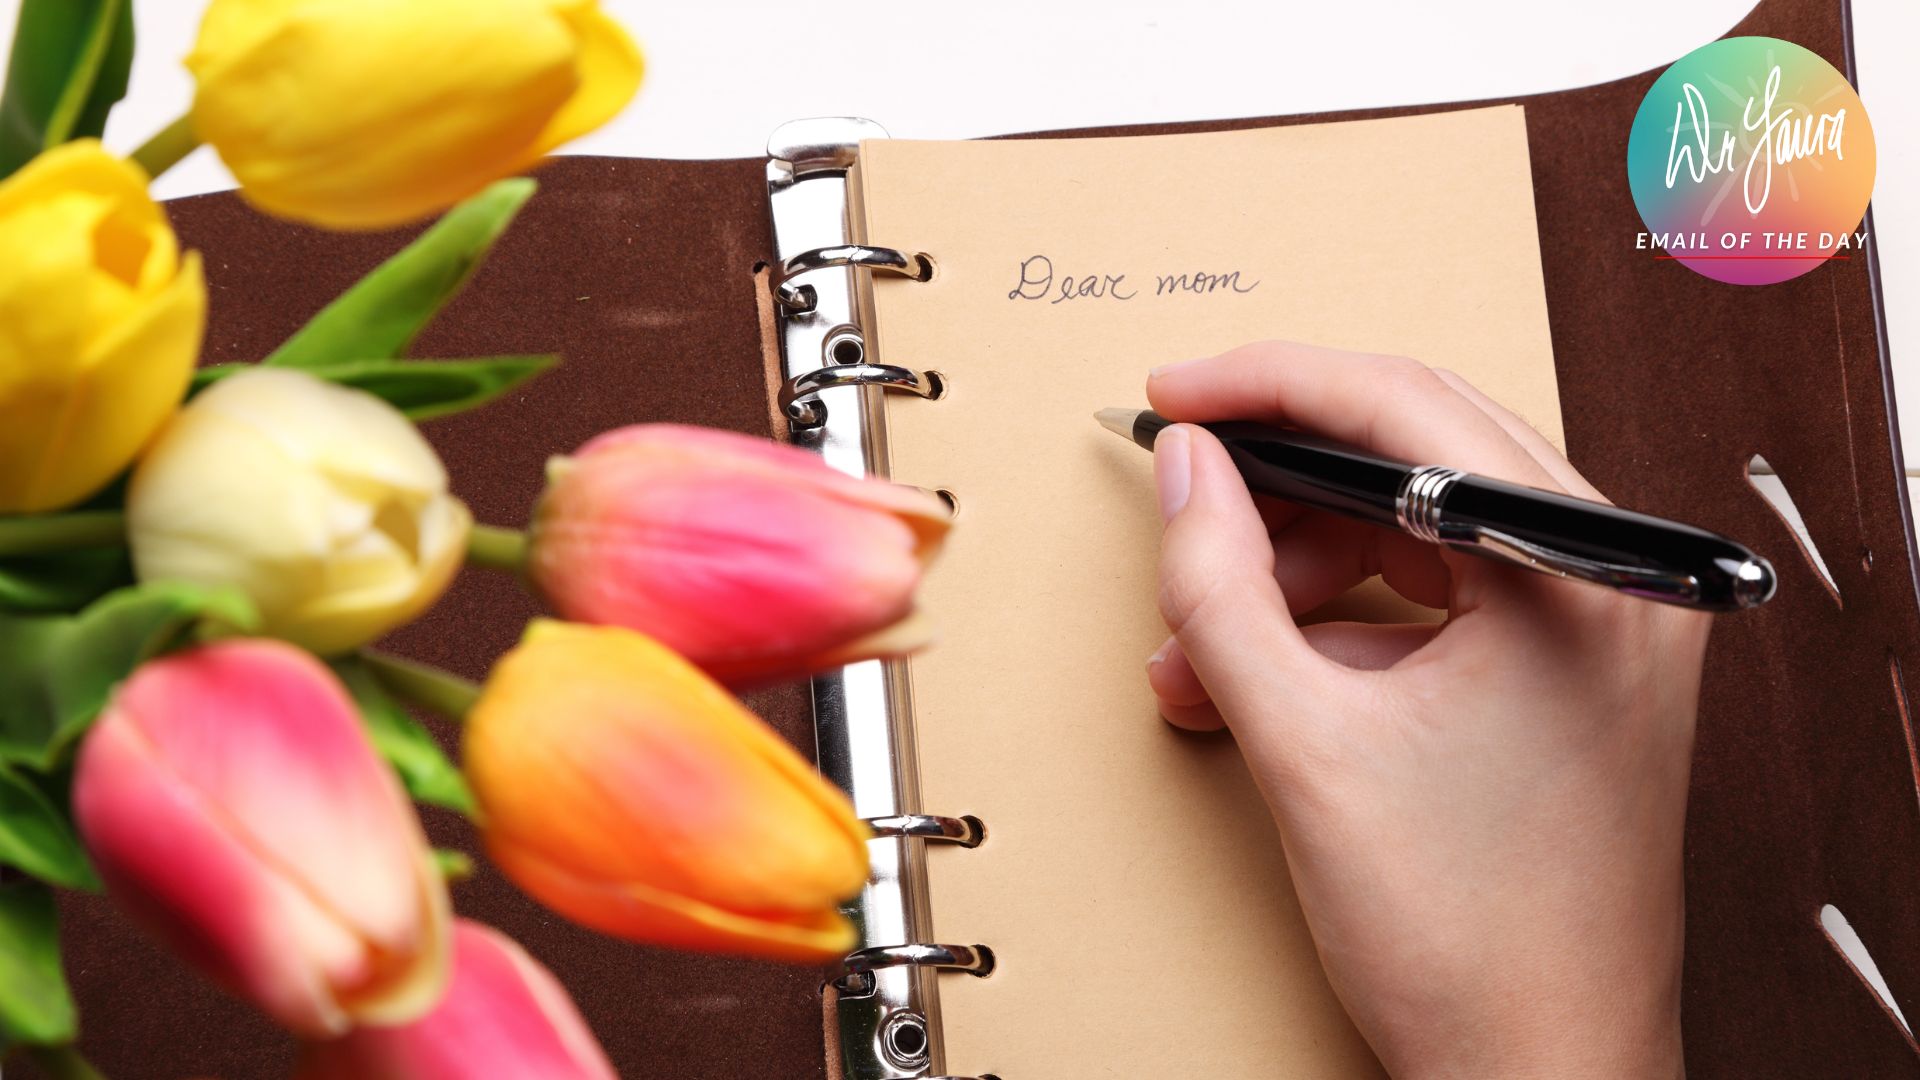 Hand holds pen while writing in notebook, "Dear mom," with tulips on the left side